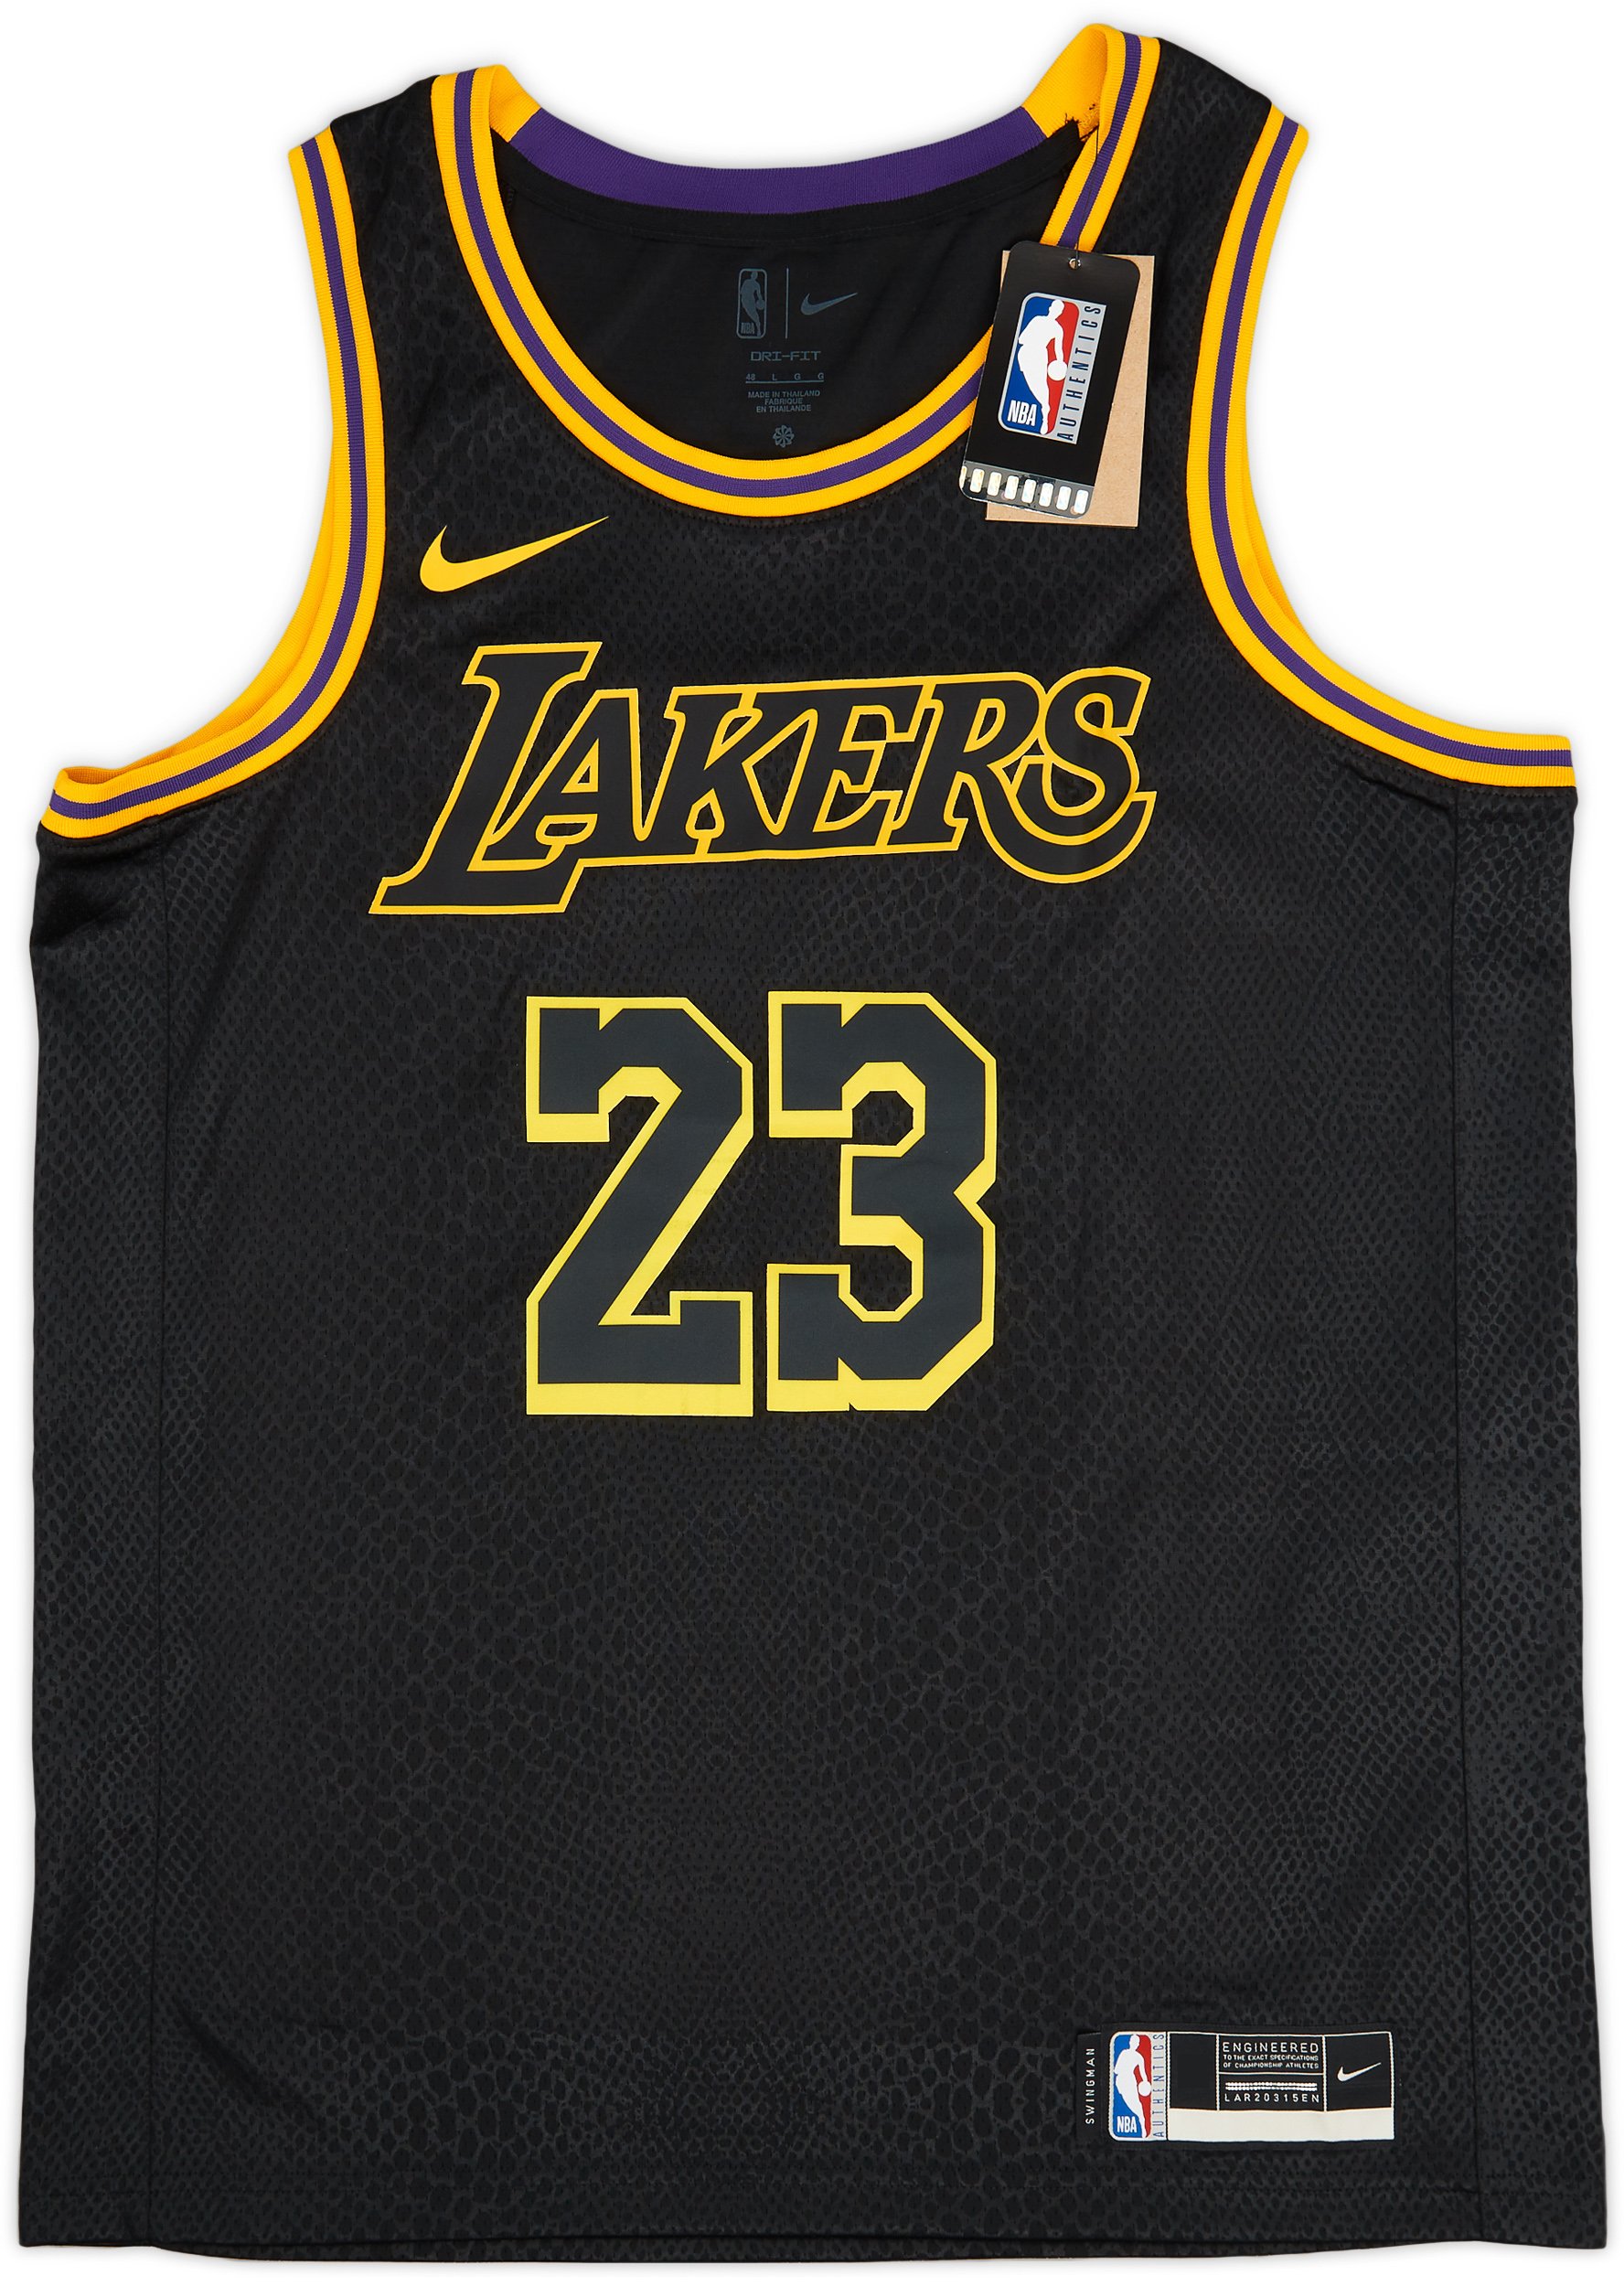 black and white laker jersey